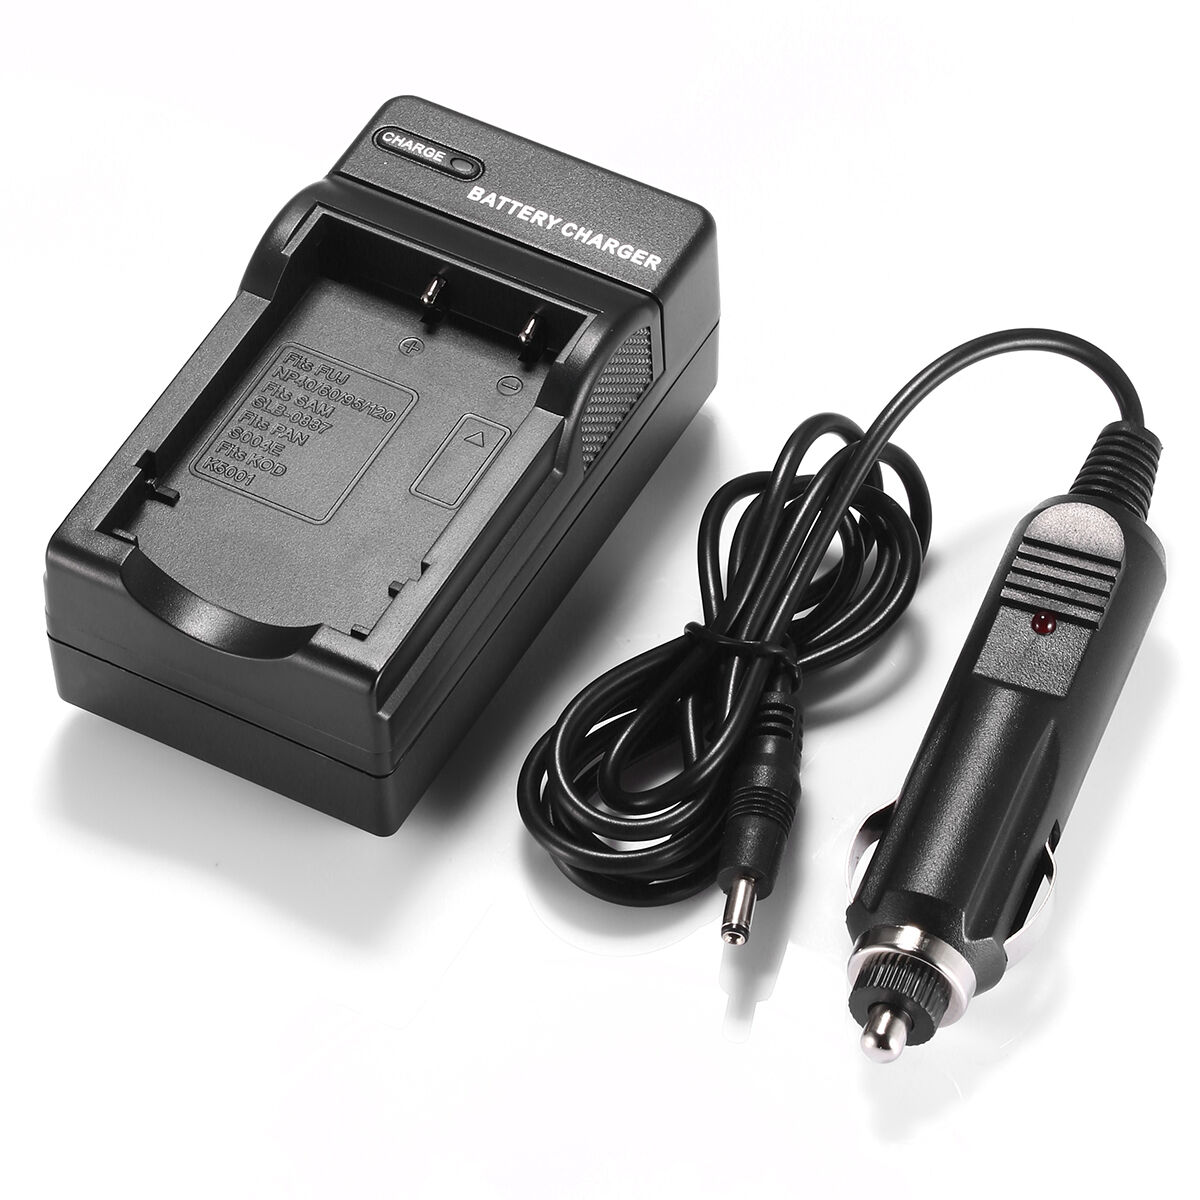 CASIO NP-70 battery charger